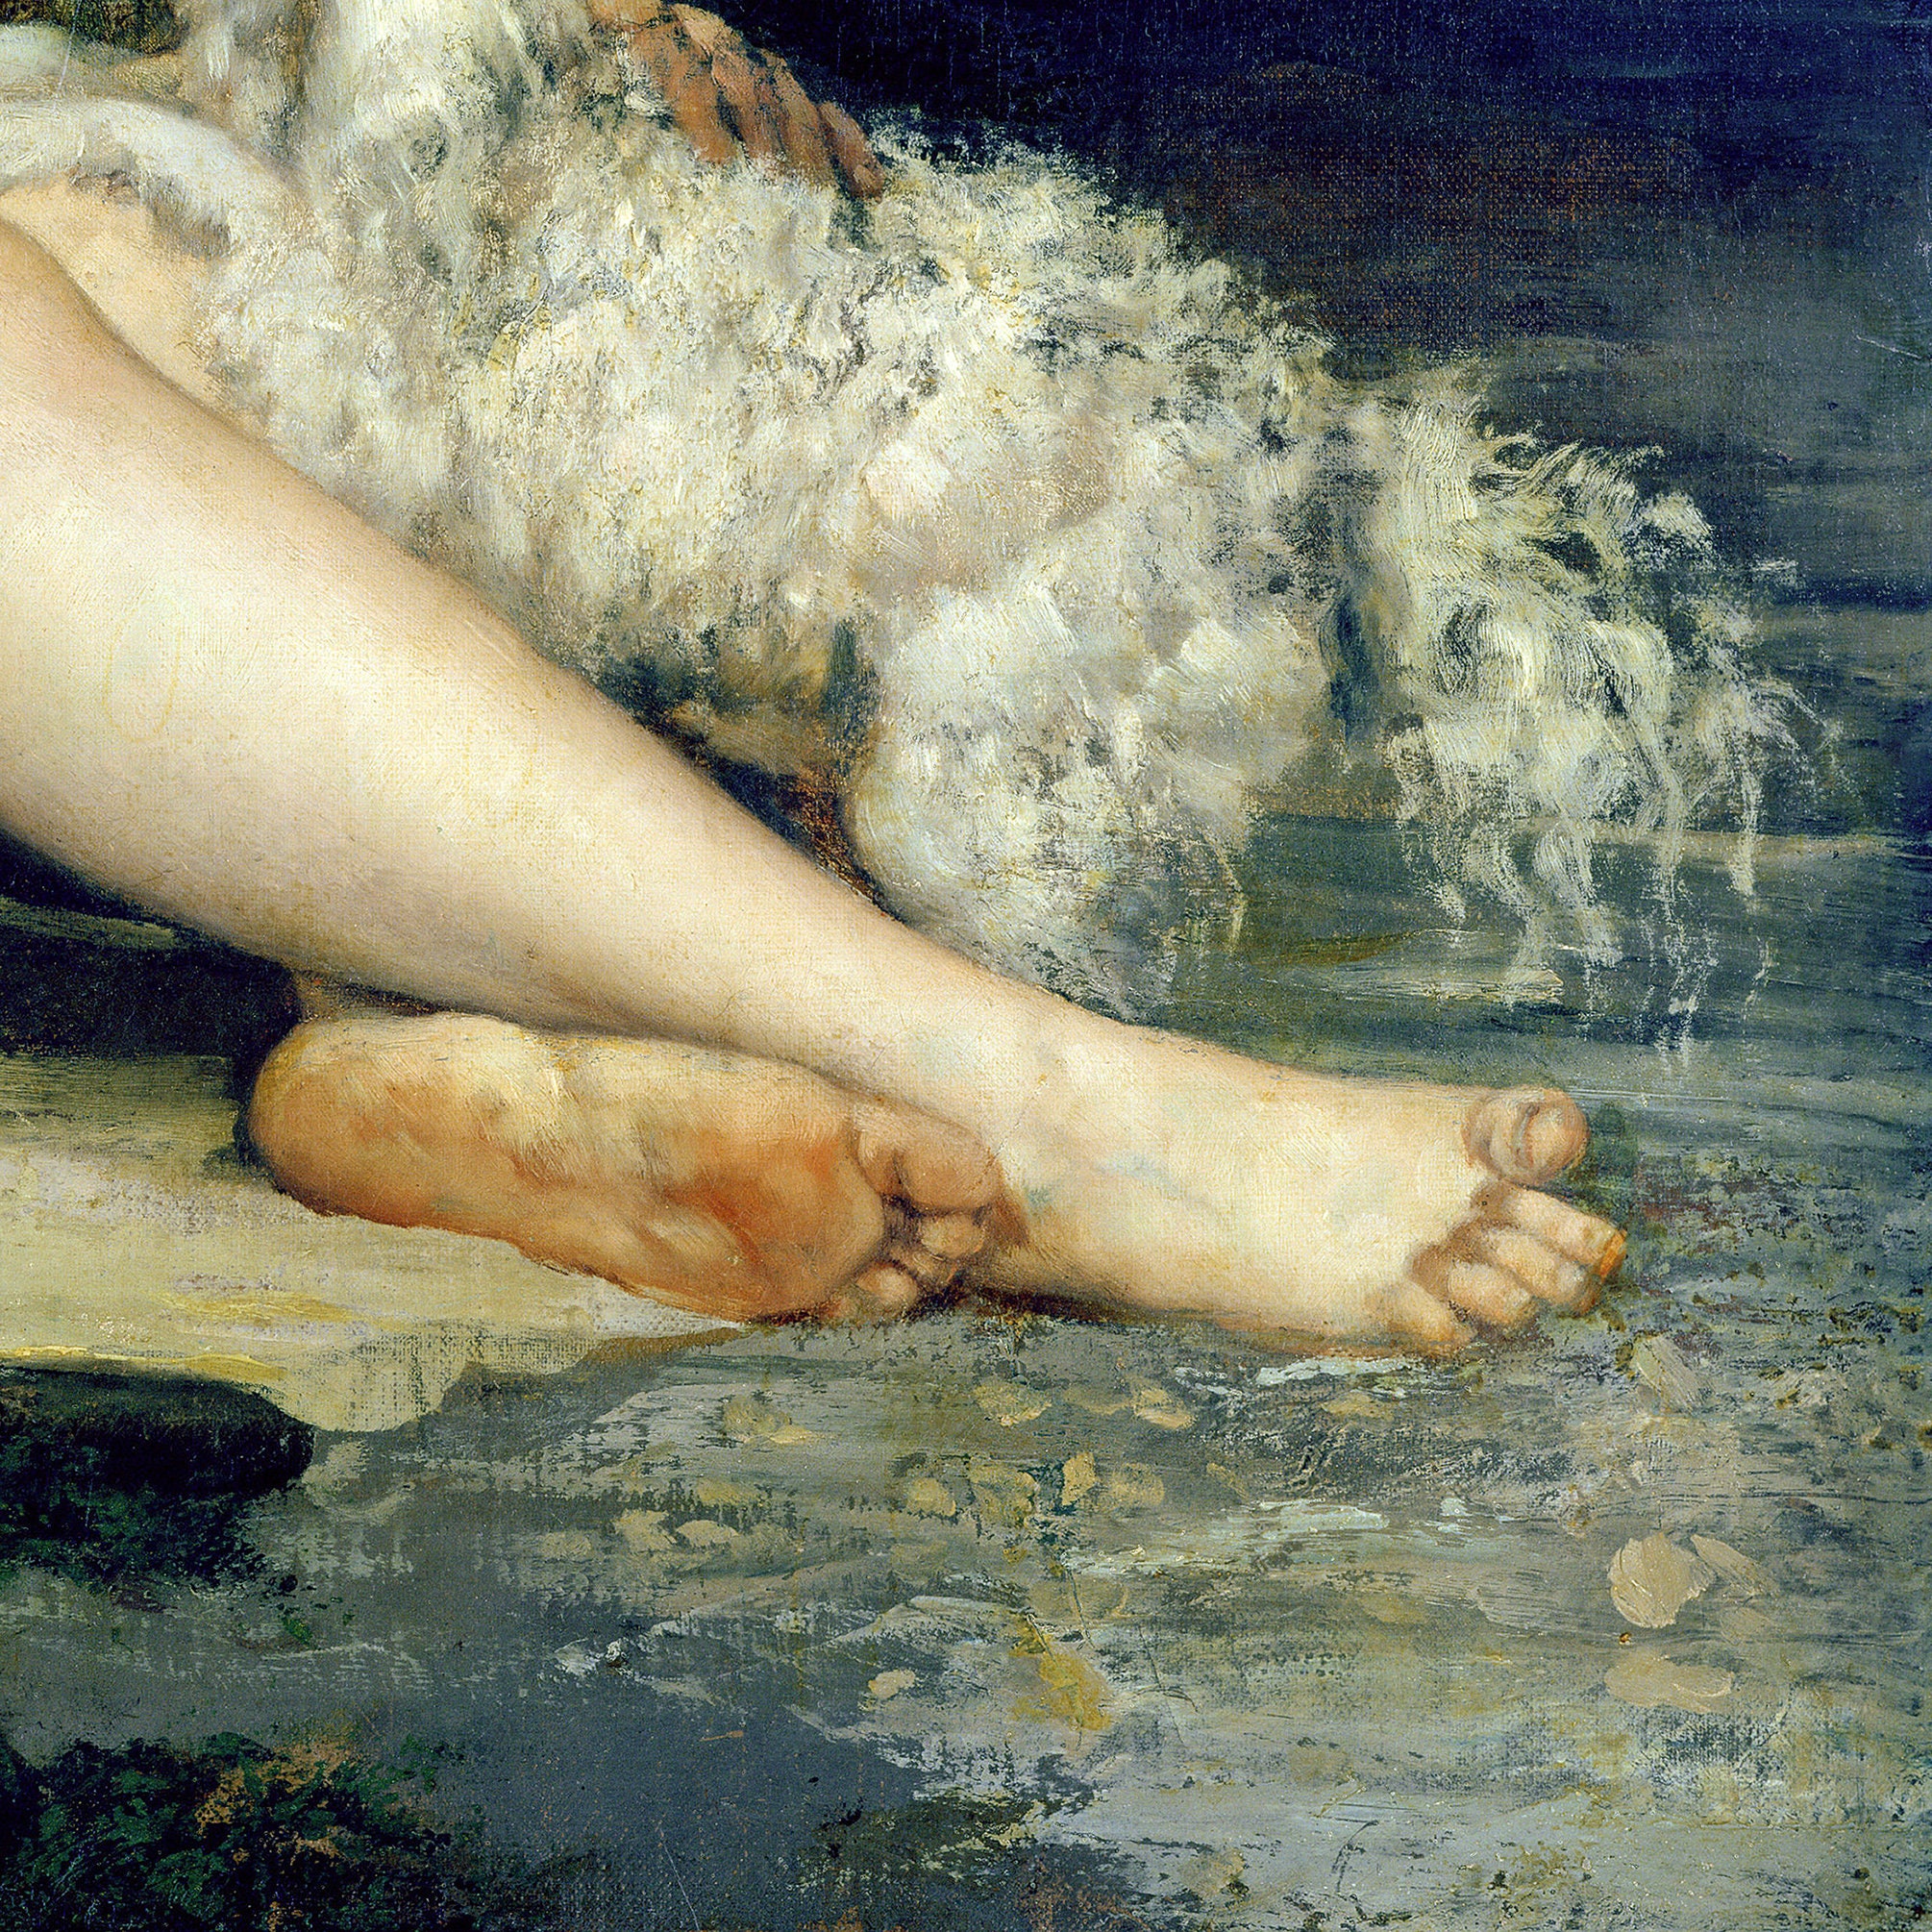 Femme nue au chien - Gustave Courbet as art print or hand painted oil.